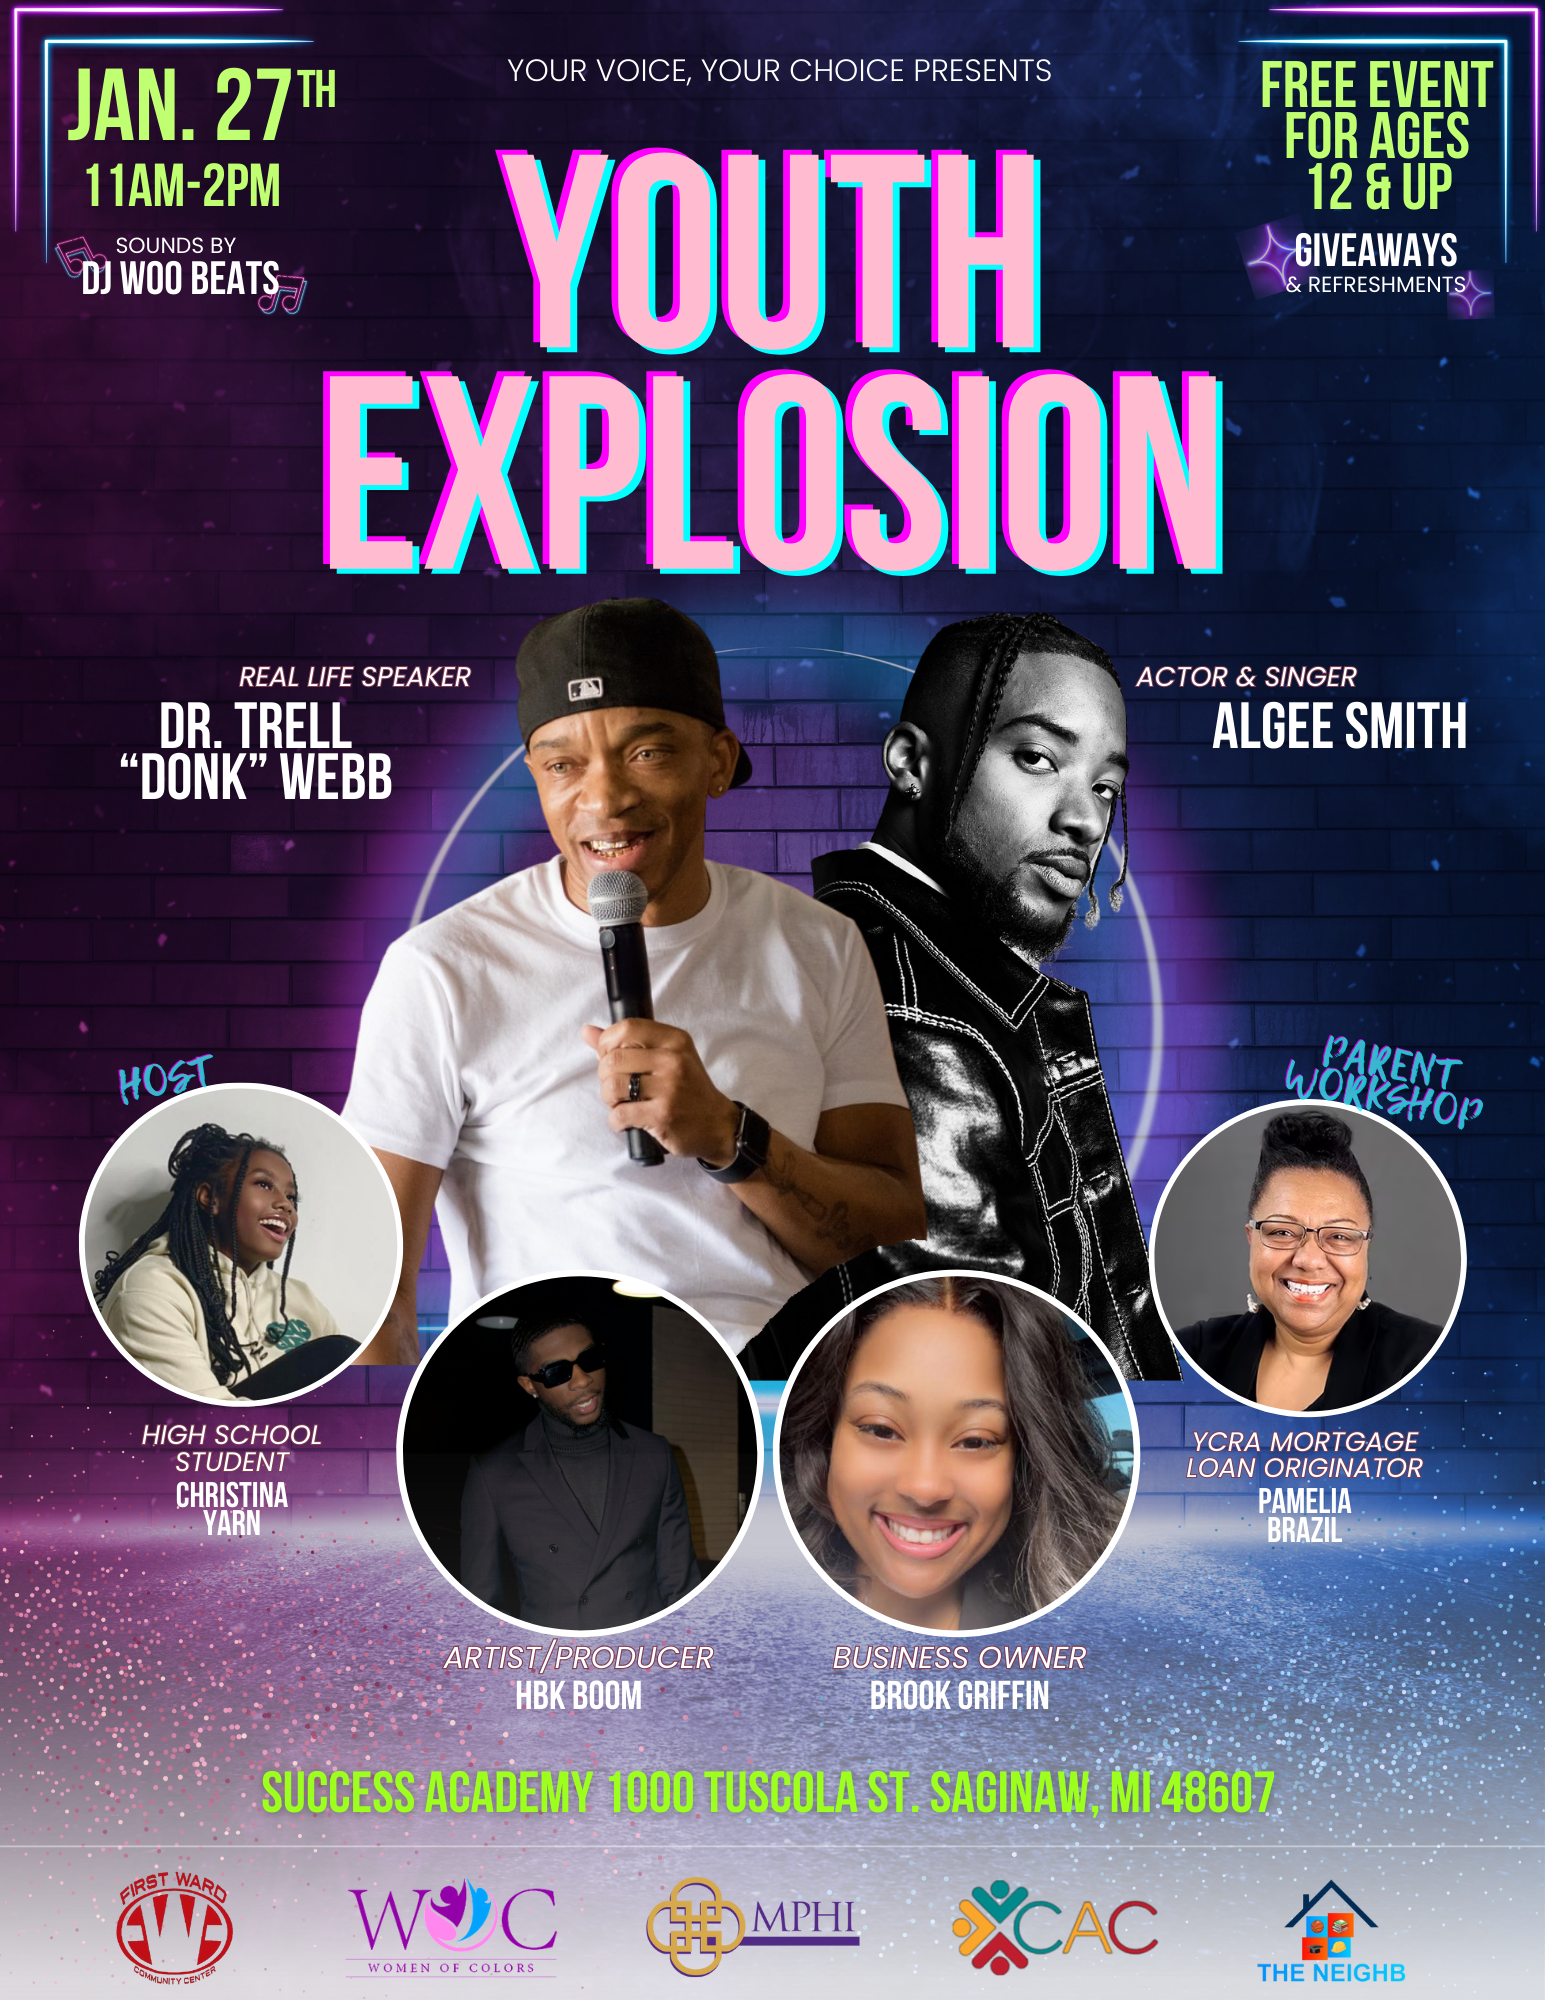 <h1 class="tribe-events-single-event-title">Your Voice, Your Choice presents The Youth Explosion</h1>